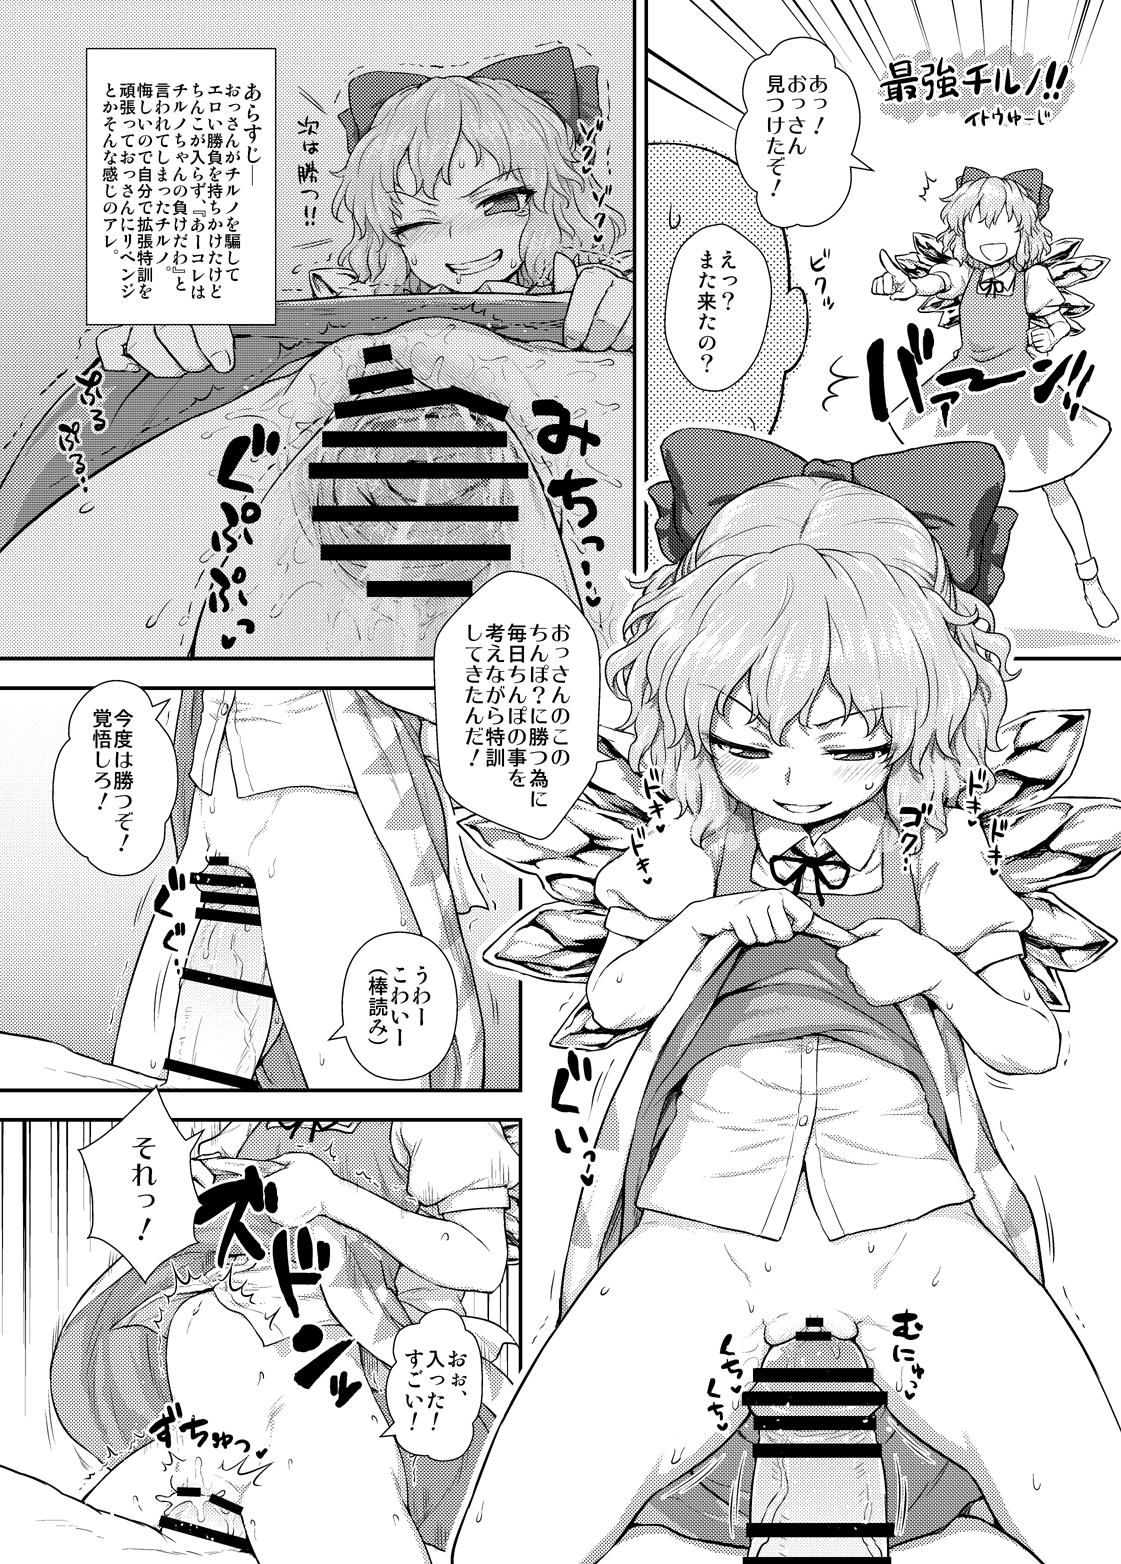 Blow Job 『東方子宮脱合同誌』 - Touhou project Gay Anal - Page 1